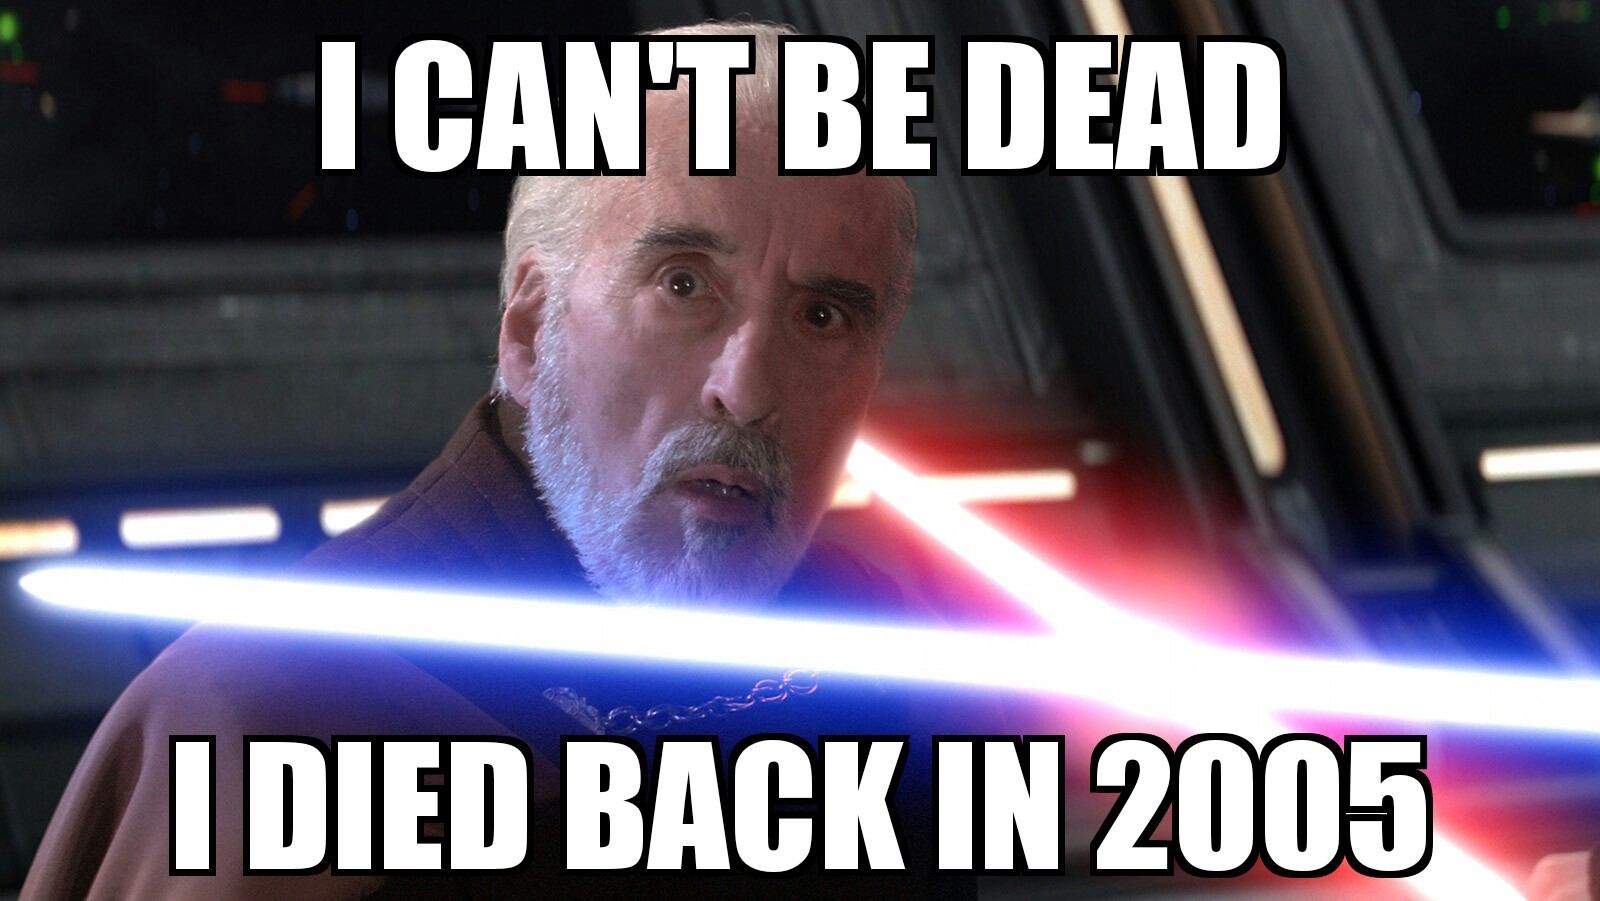 He is now one with the force - meme